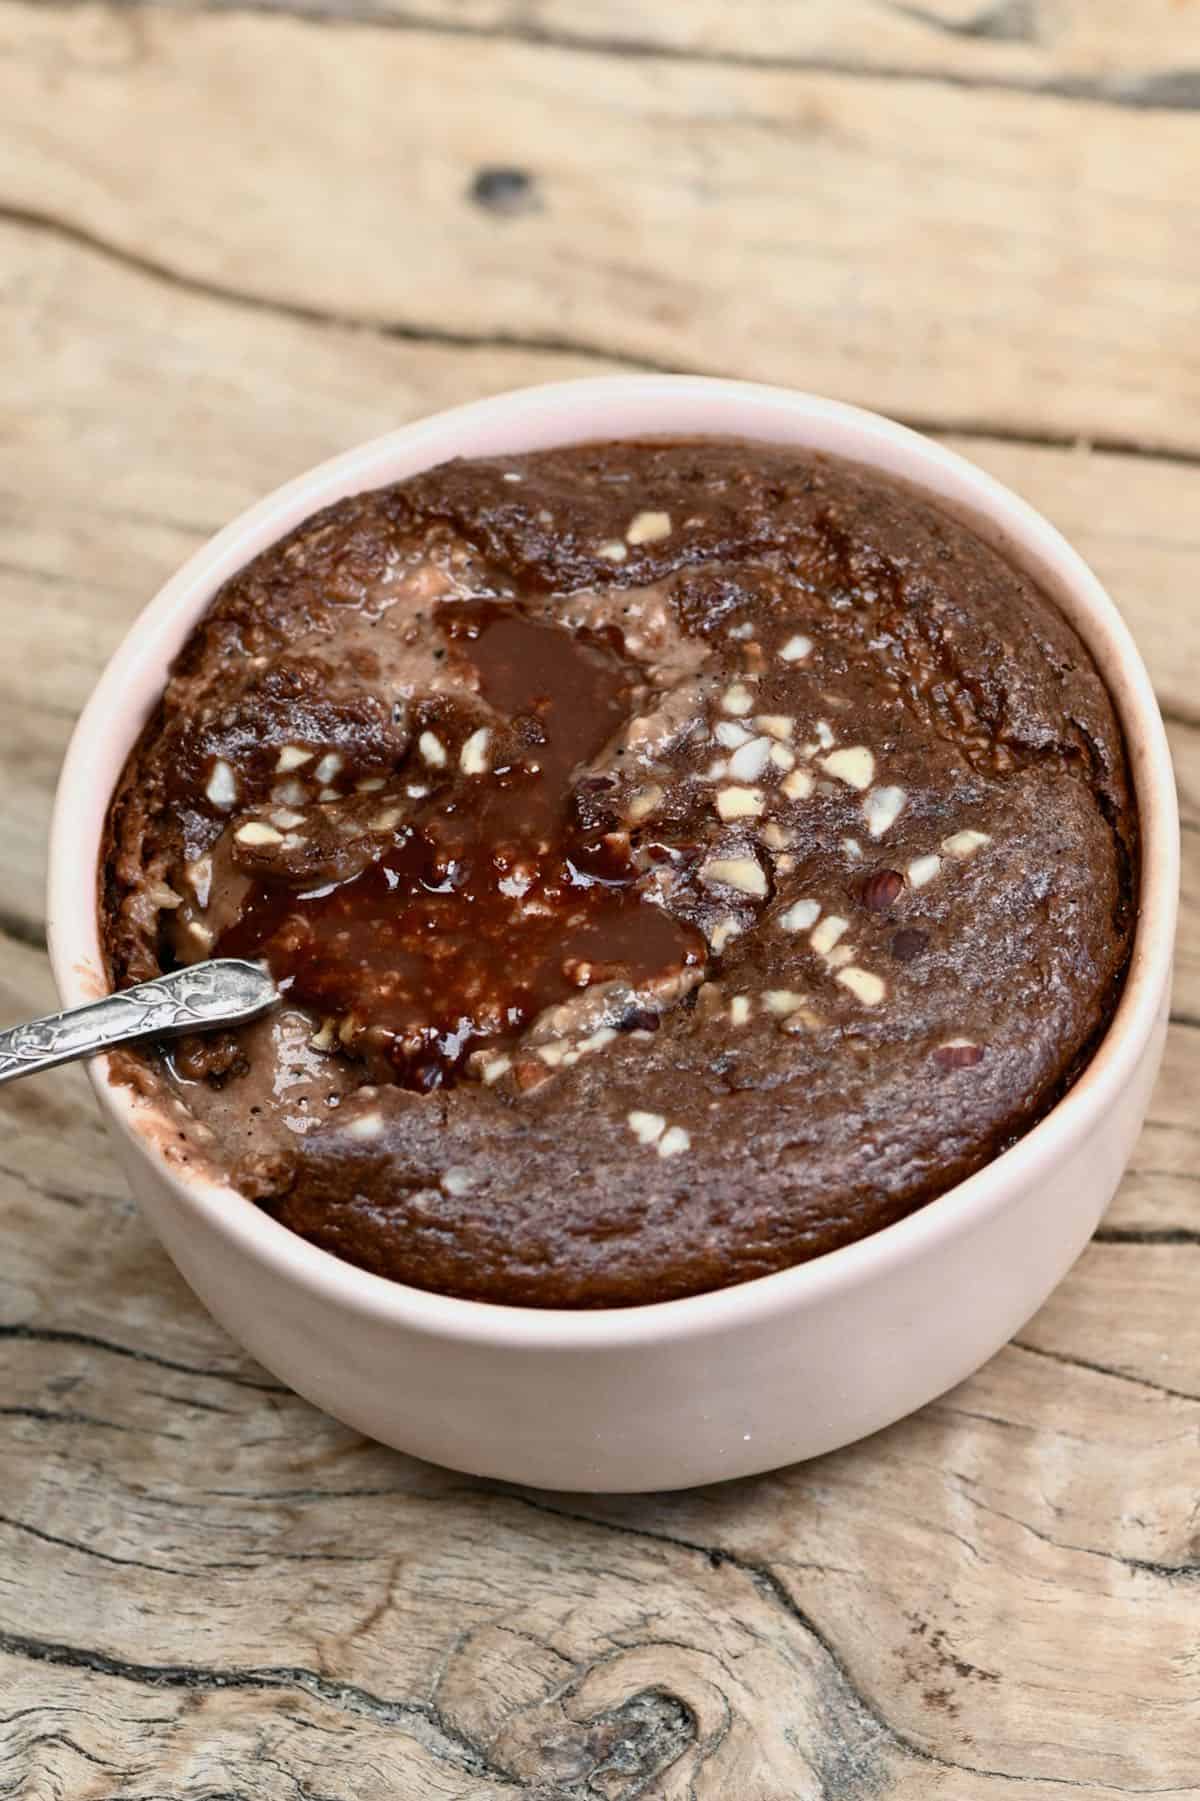 Baked chocolate oatmeal with spoon dipped in the bowl